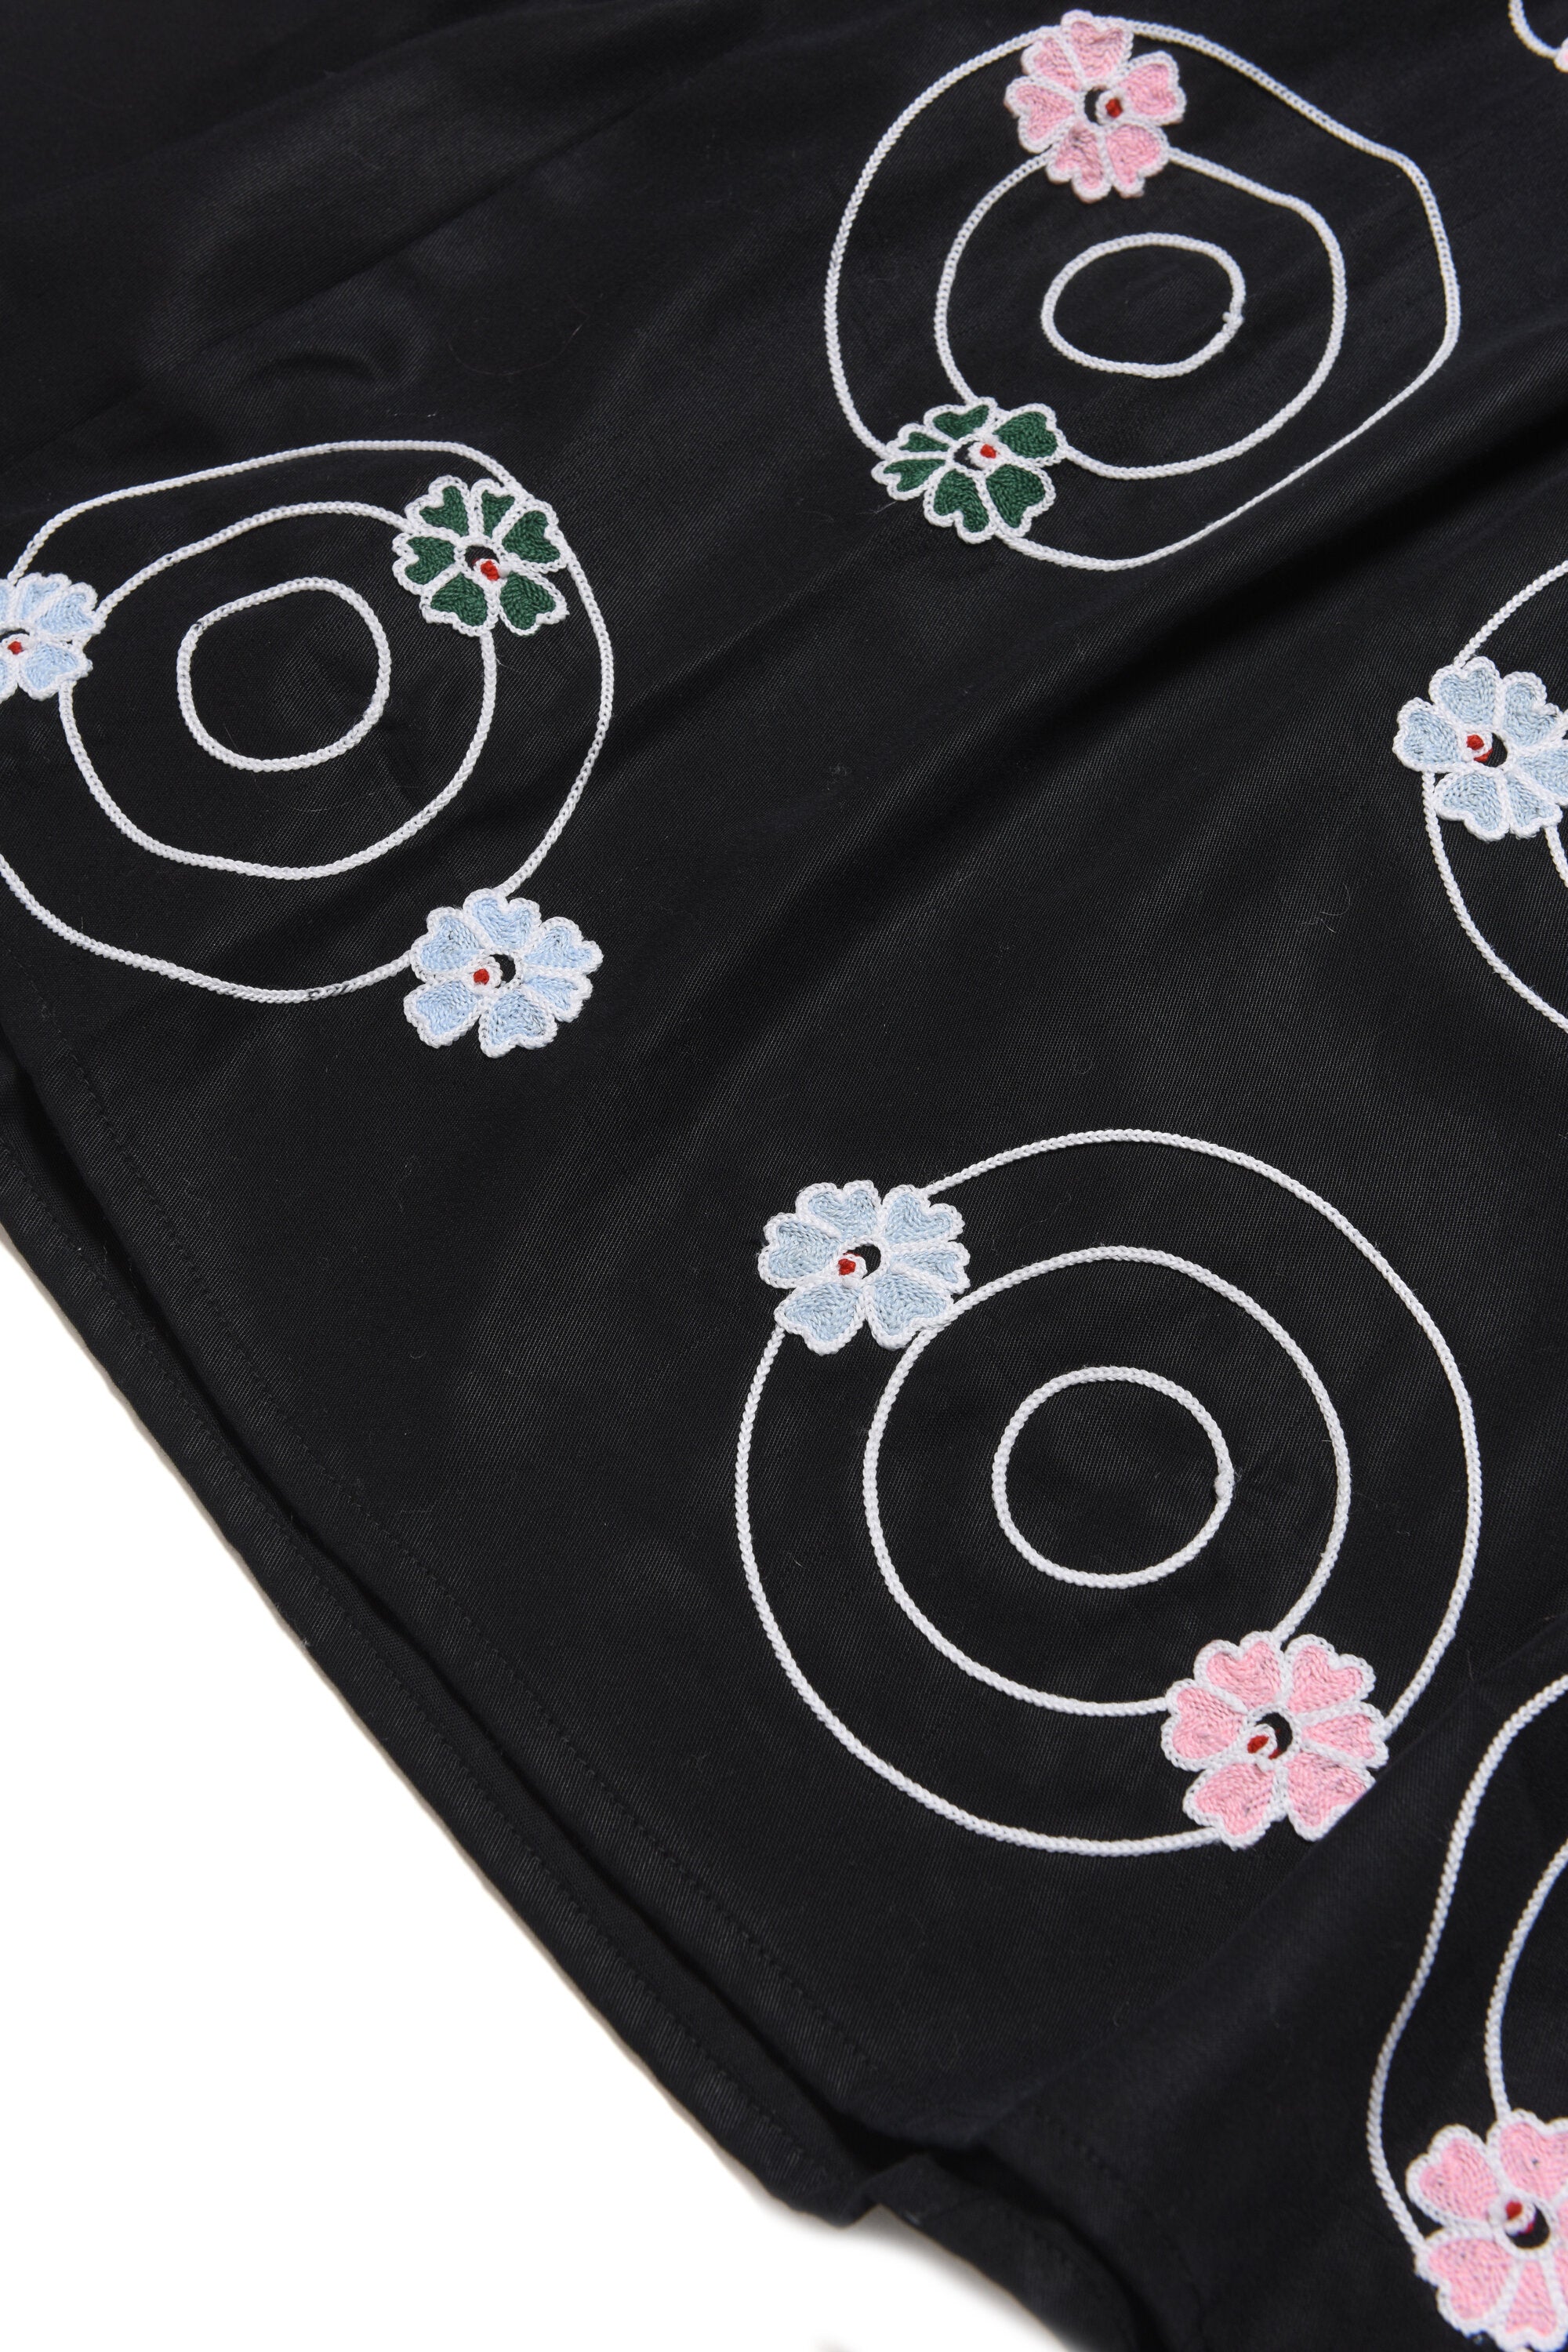 Viscose dress with Circles 70's embroidery